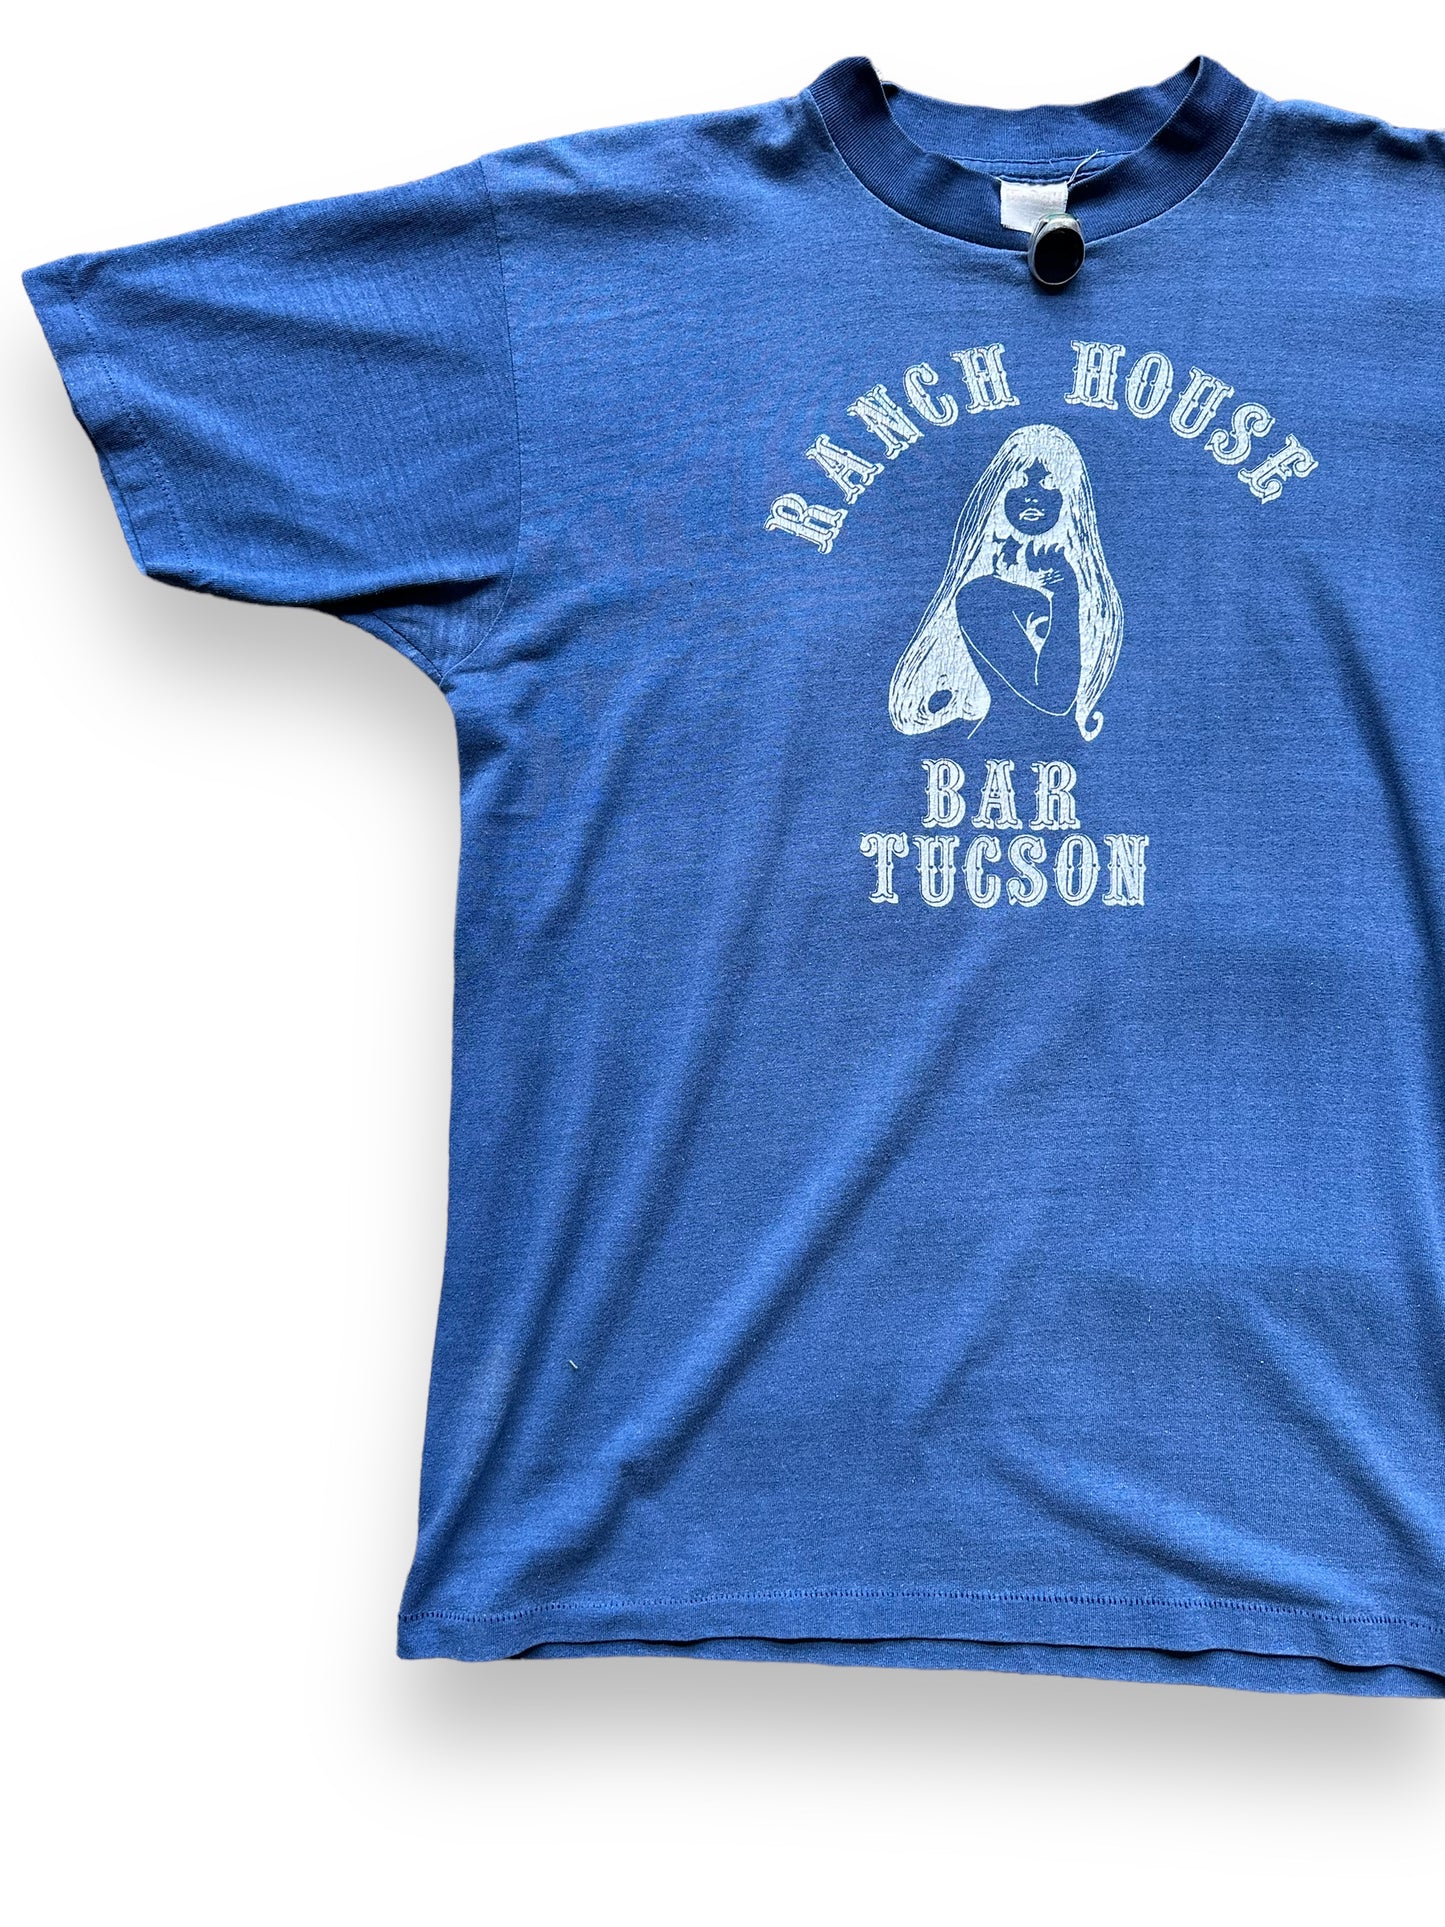 Front Right View of Vintage Ranch House Bar Tucson Tee SZ L | Vintage Nudie Bar T-Shirts Seattle | Barn Owl Vintage Tees Seattle